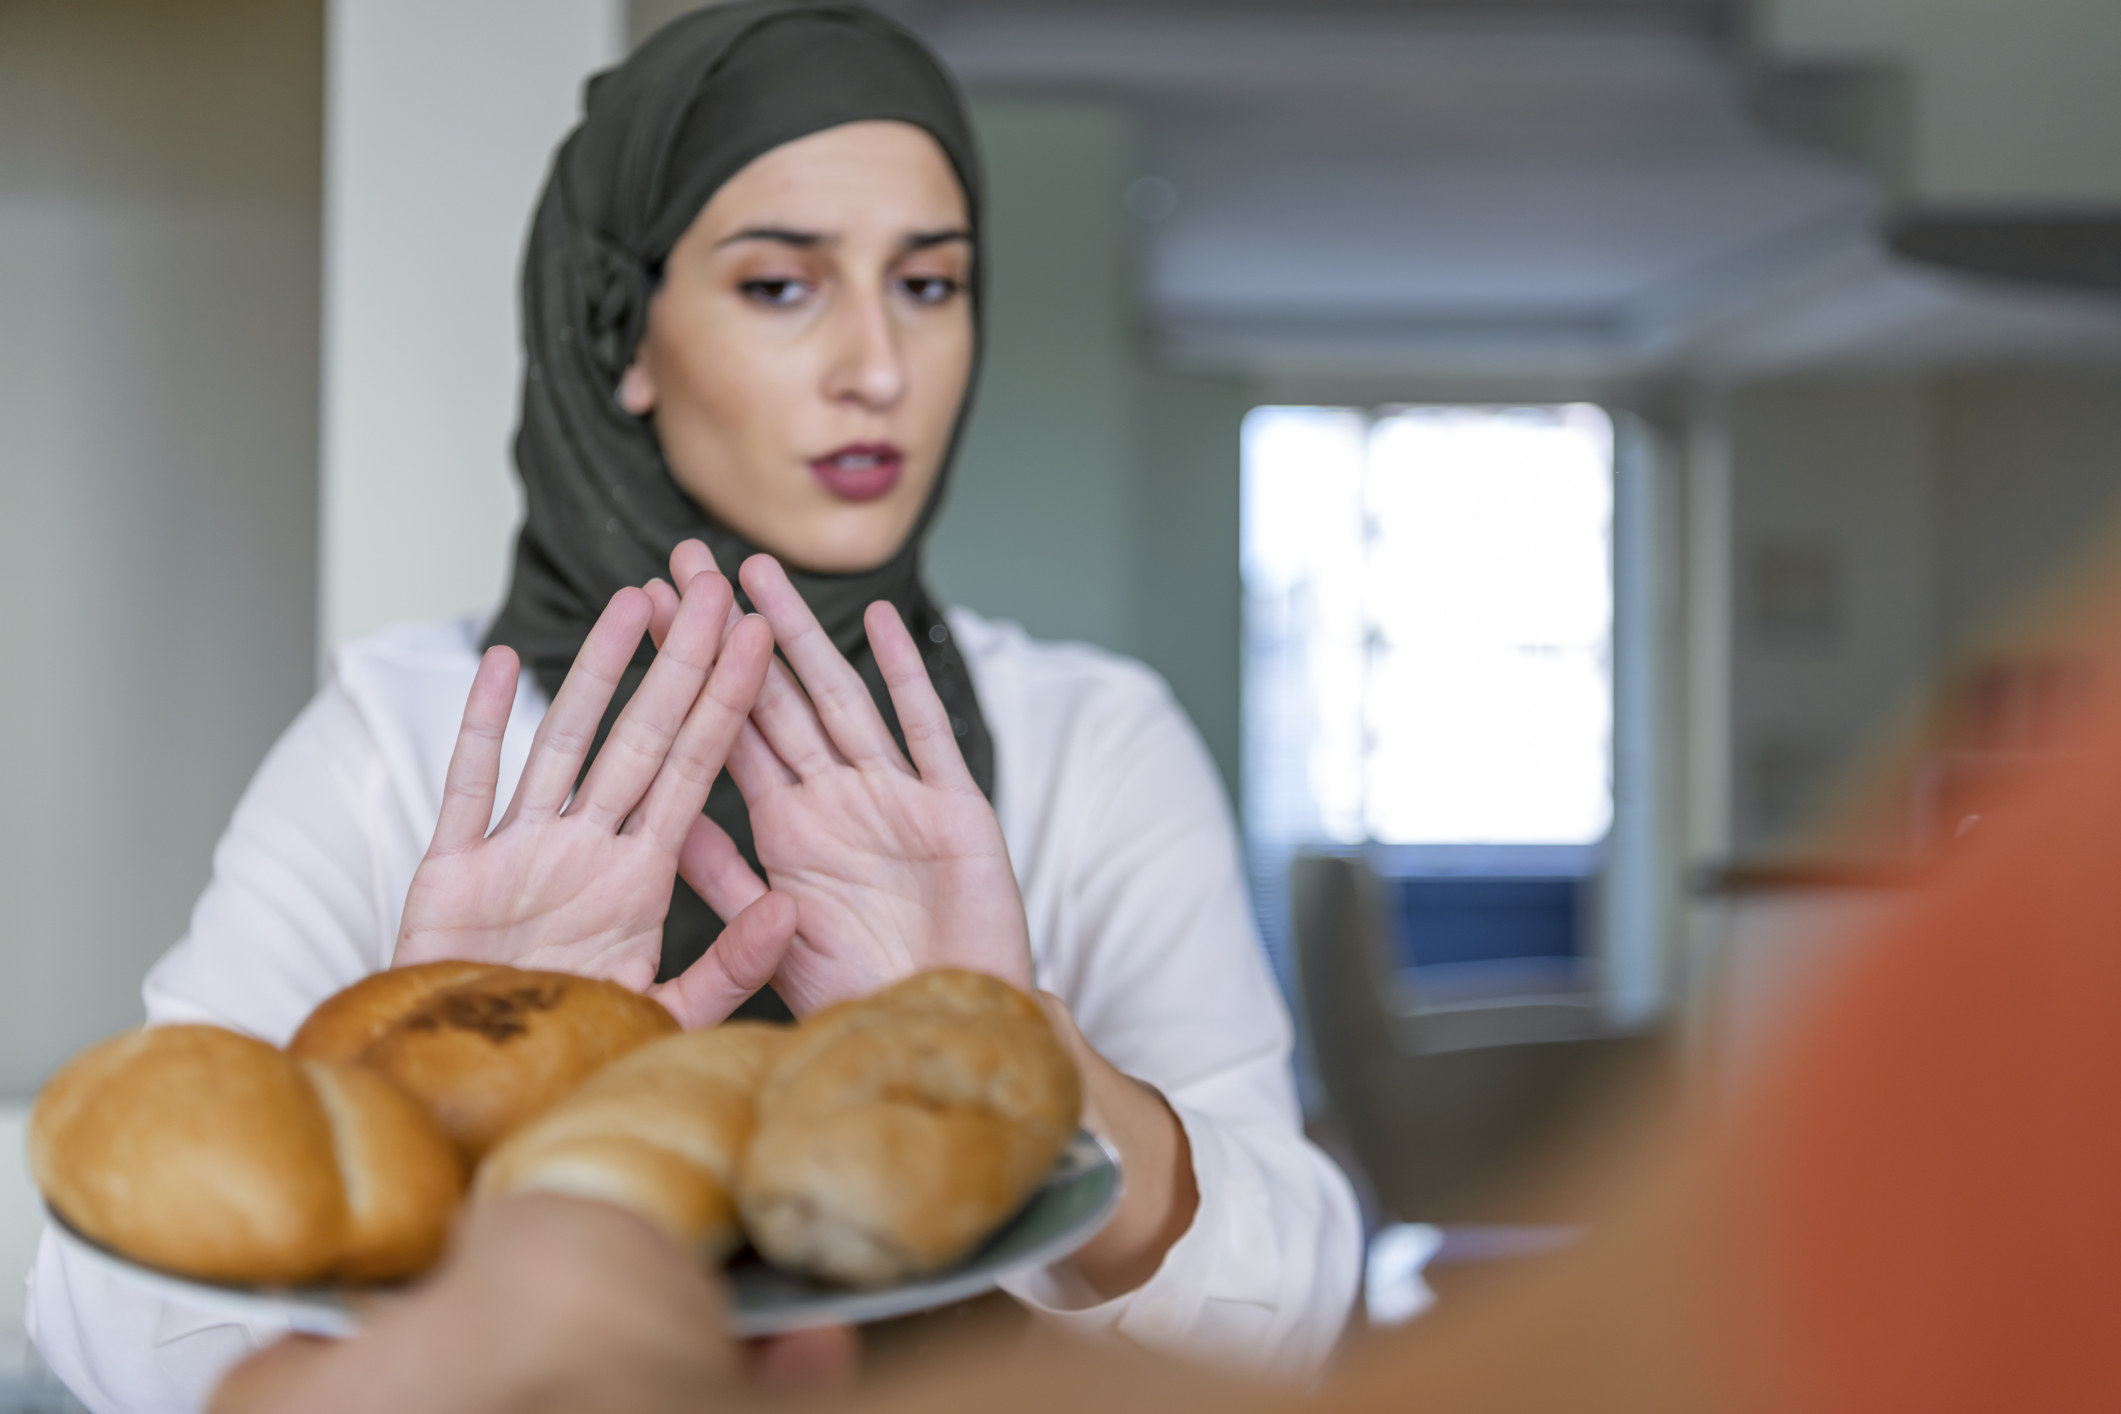 A woman refusing some bread being offered to her